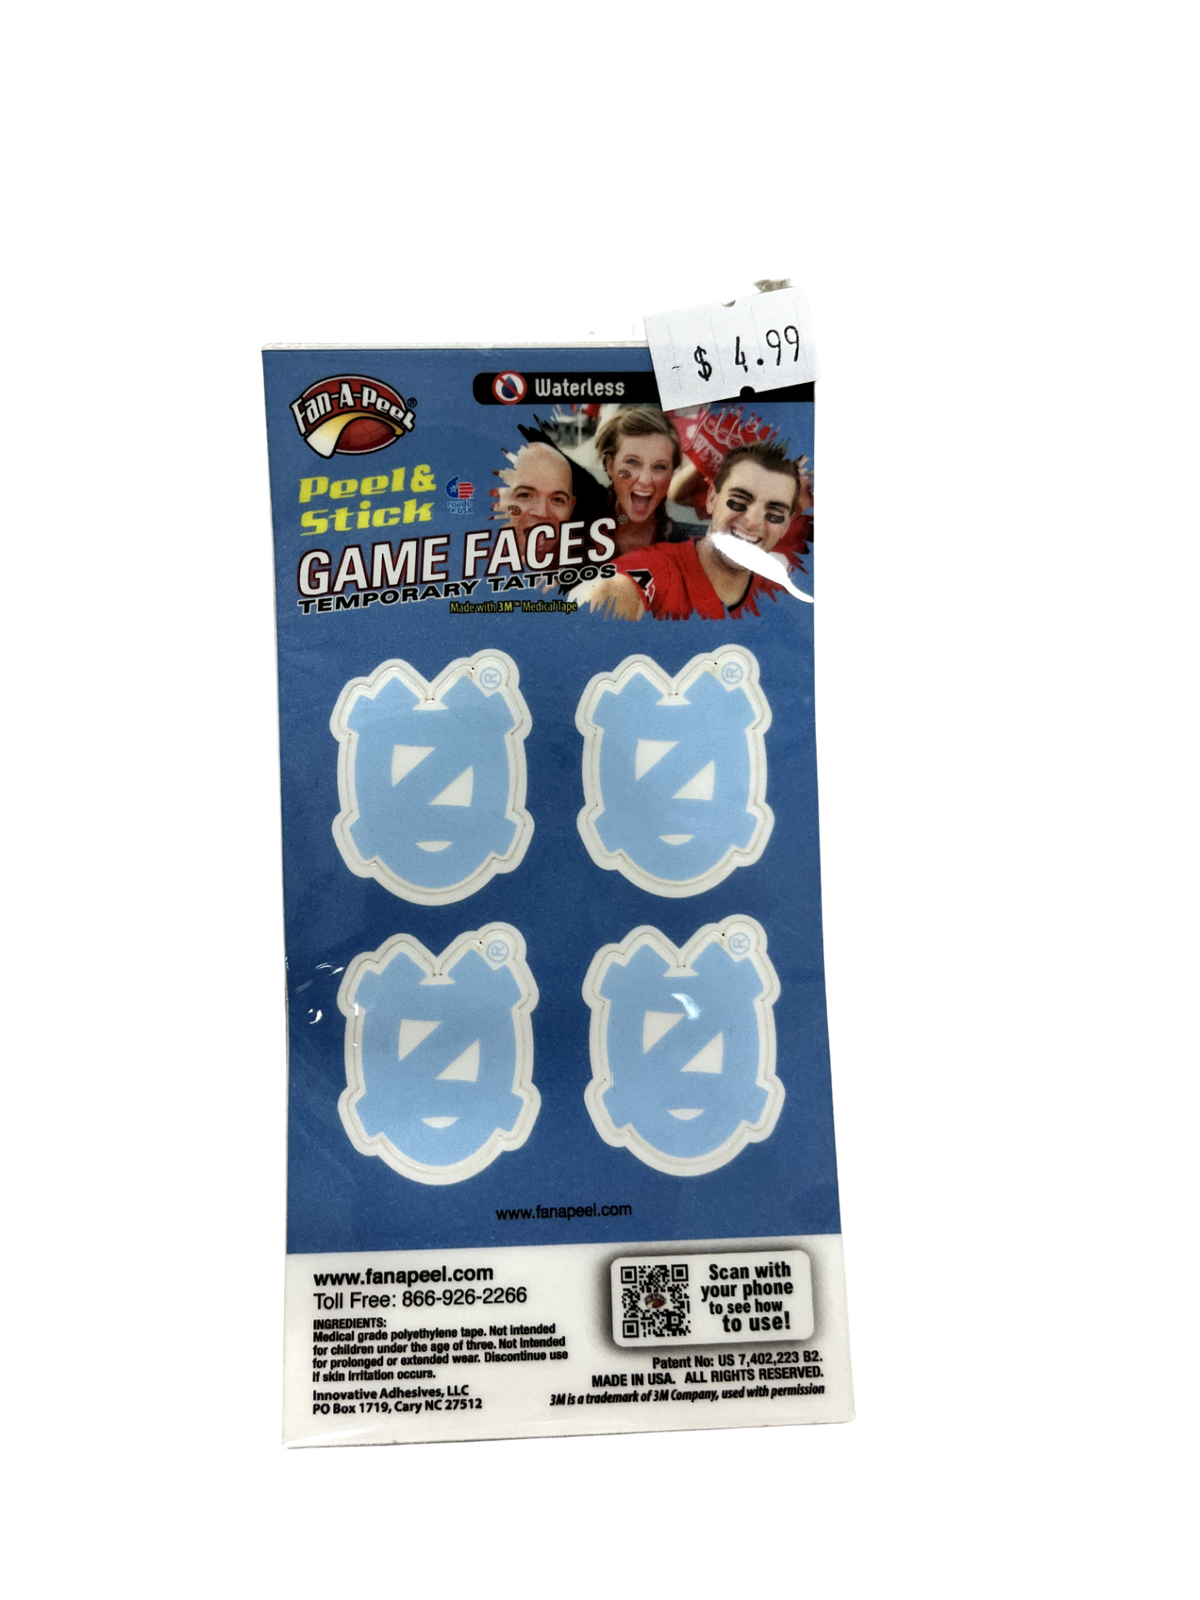 UNC Game Day Temporary Tattoos